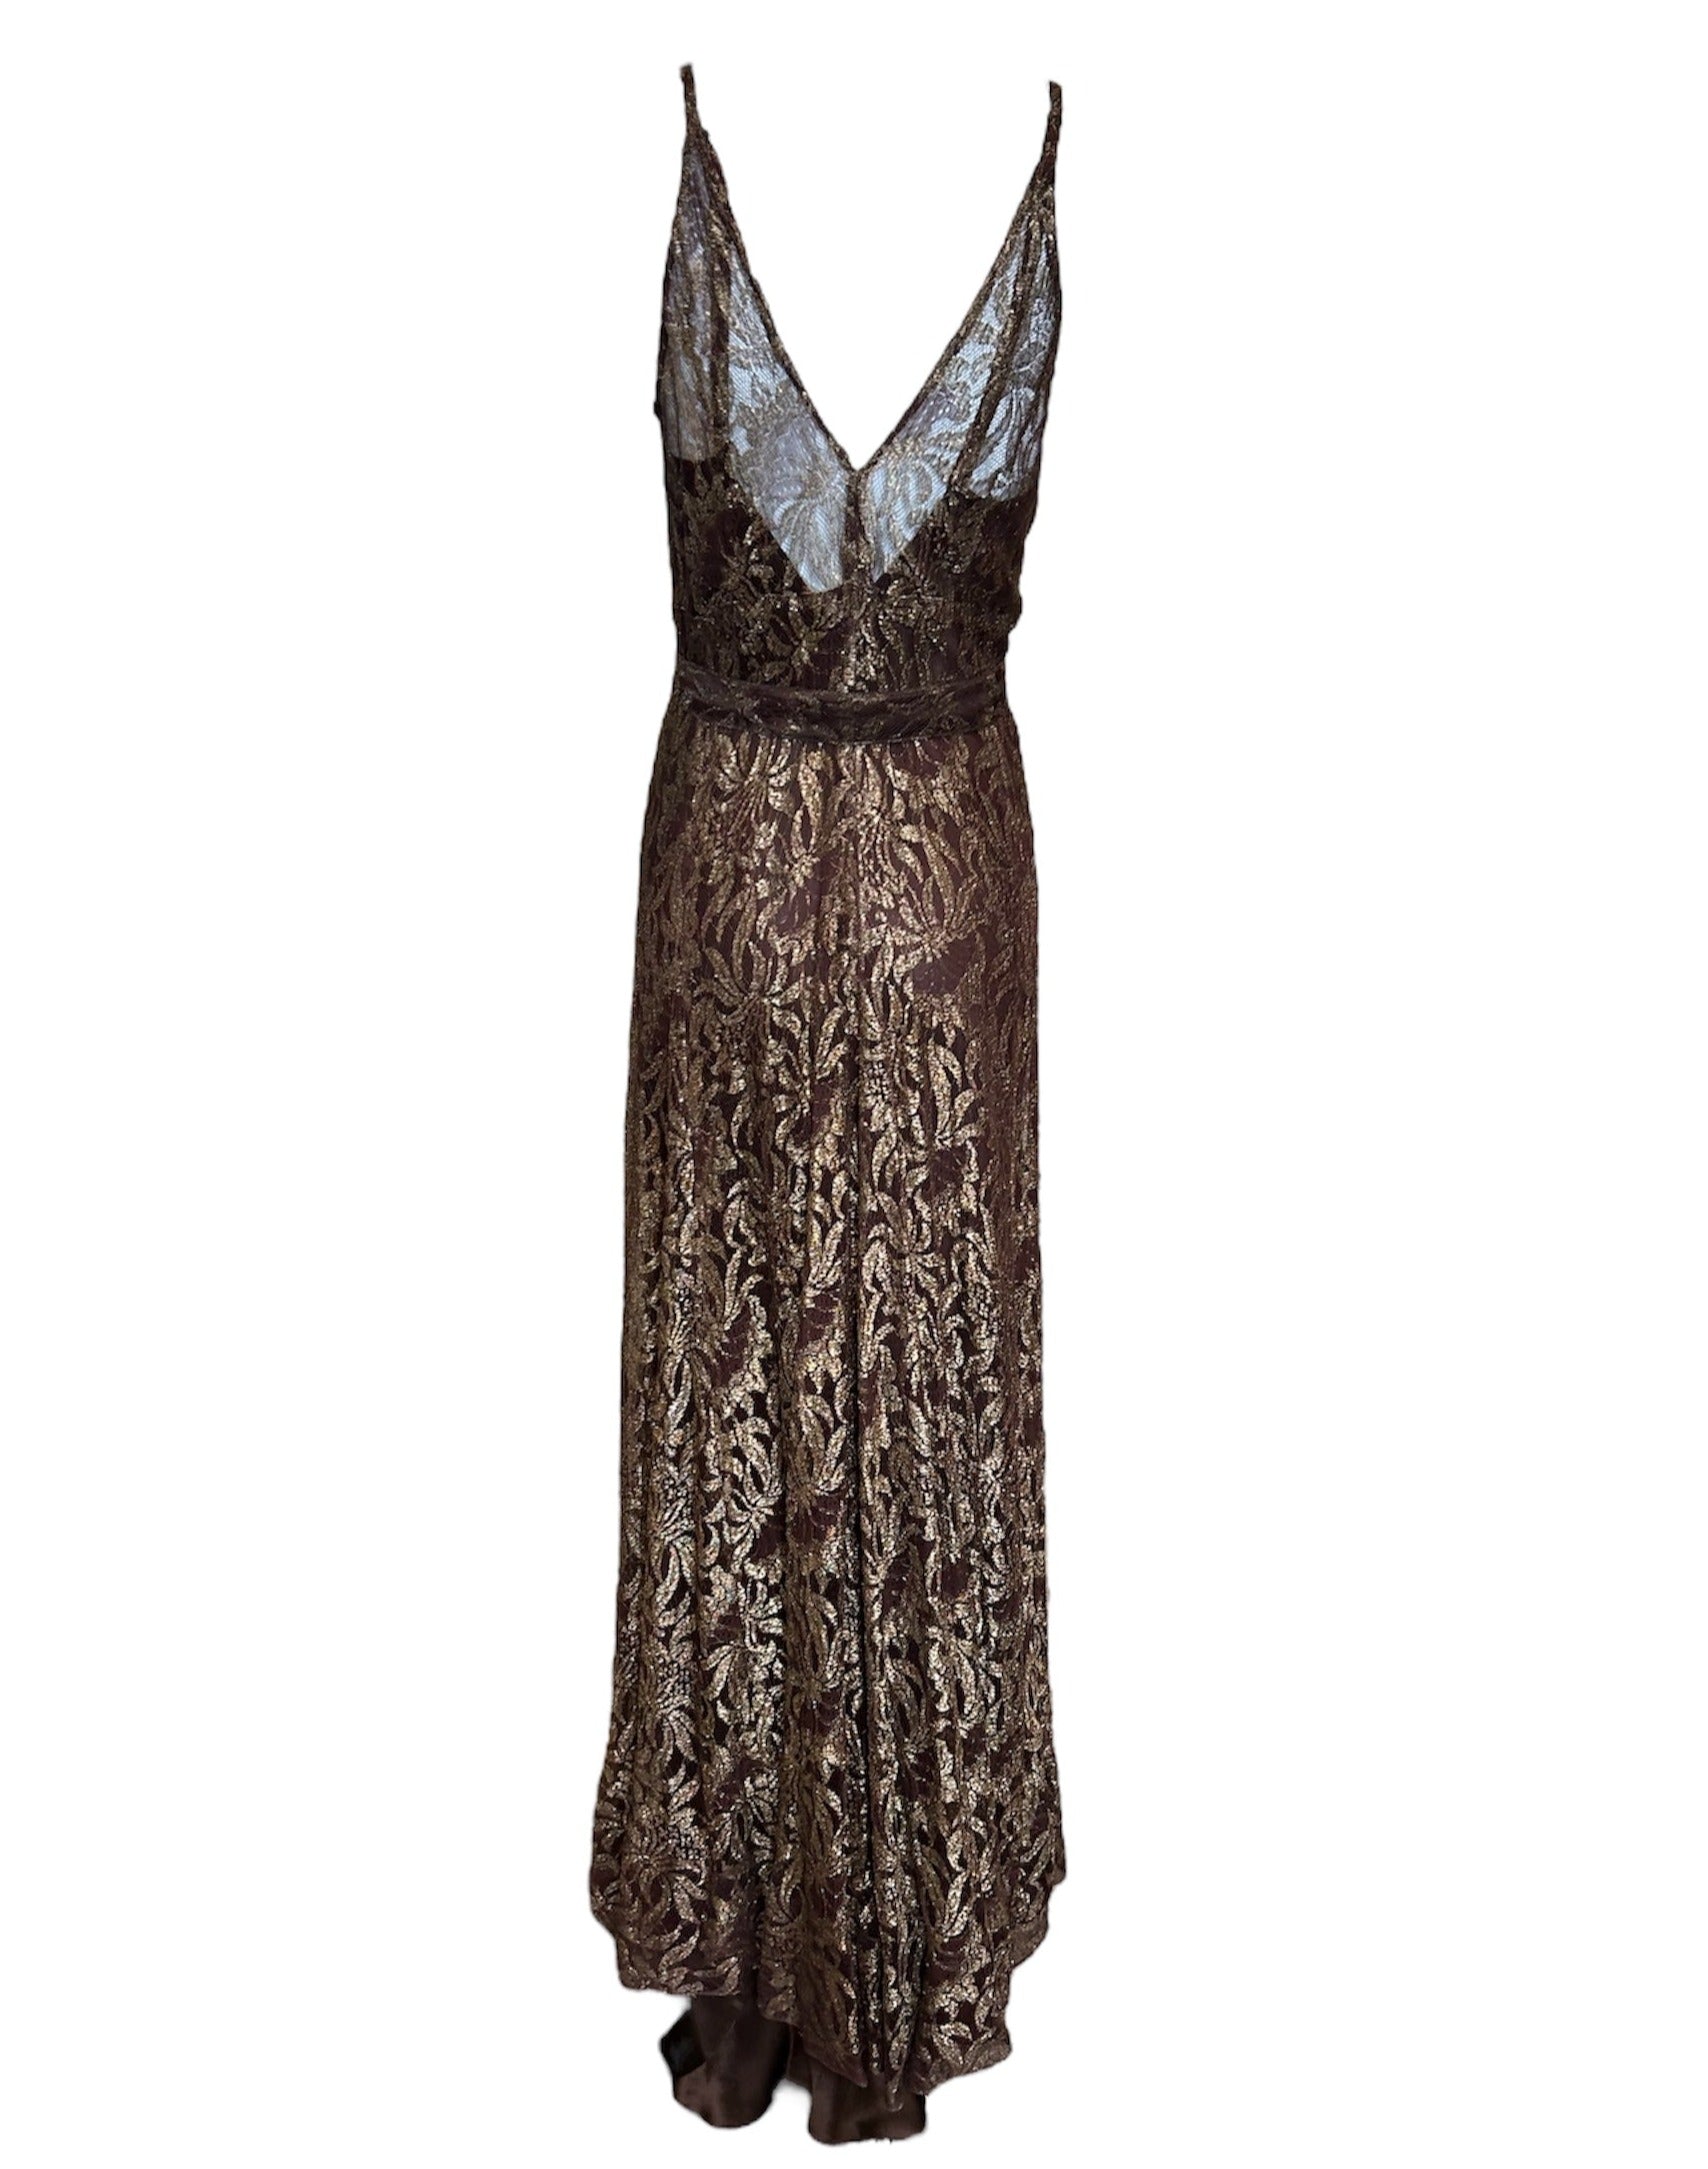 1930s Brown Lace & Gold Lame Gown w/ Belt BACK PHOTO 3 OF 4